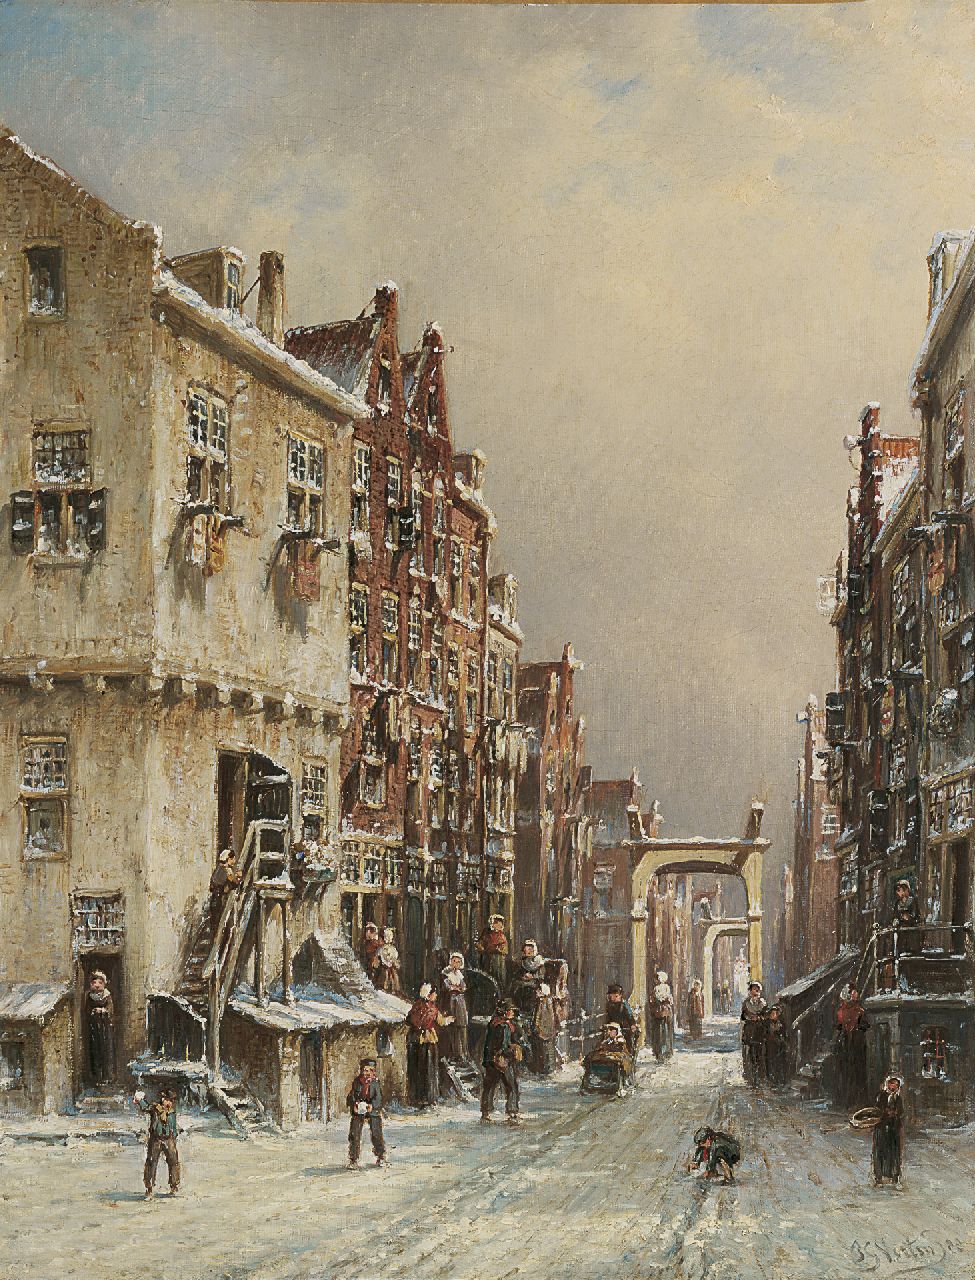 Vertin P.G.  | Petrus Gerardus Vertin, A Dutch town in winter, oil on canvas 45.5 x 35.1 cm, signed l.r. and dated 88